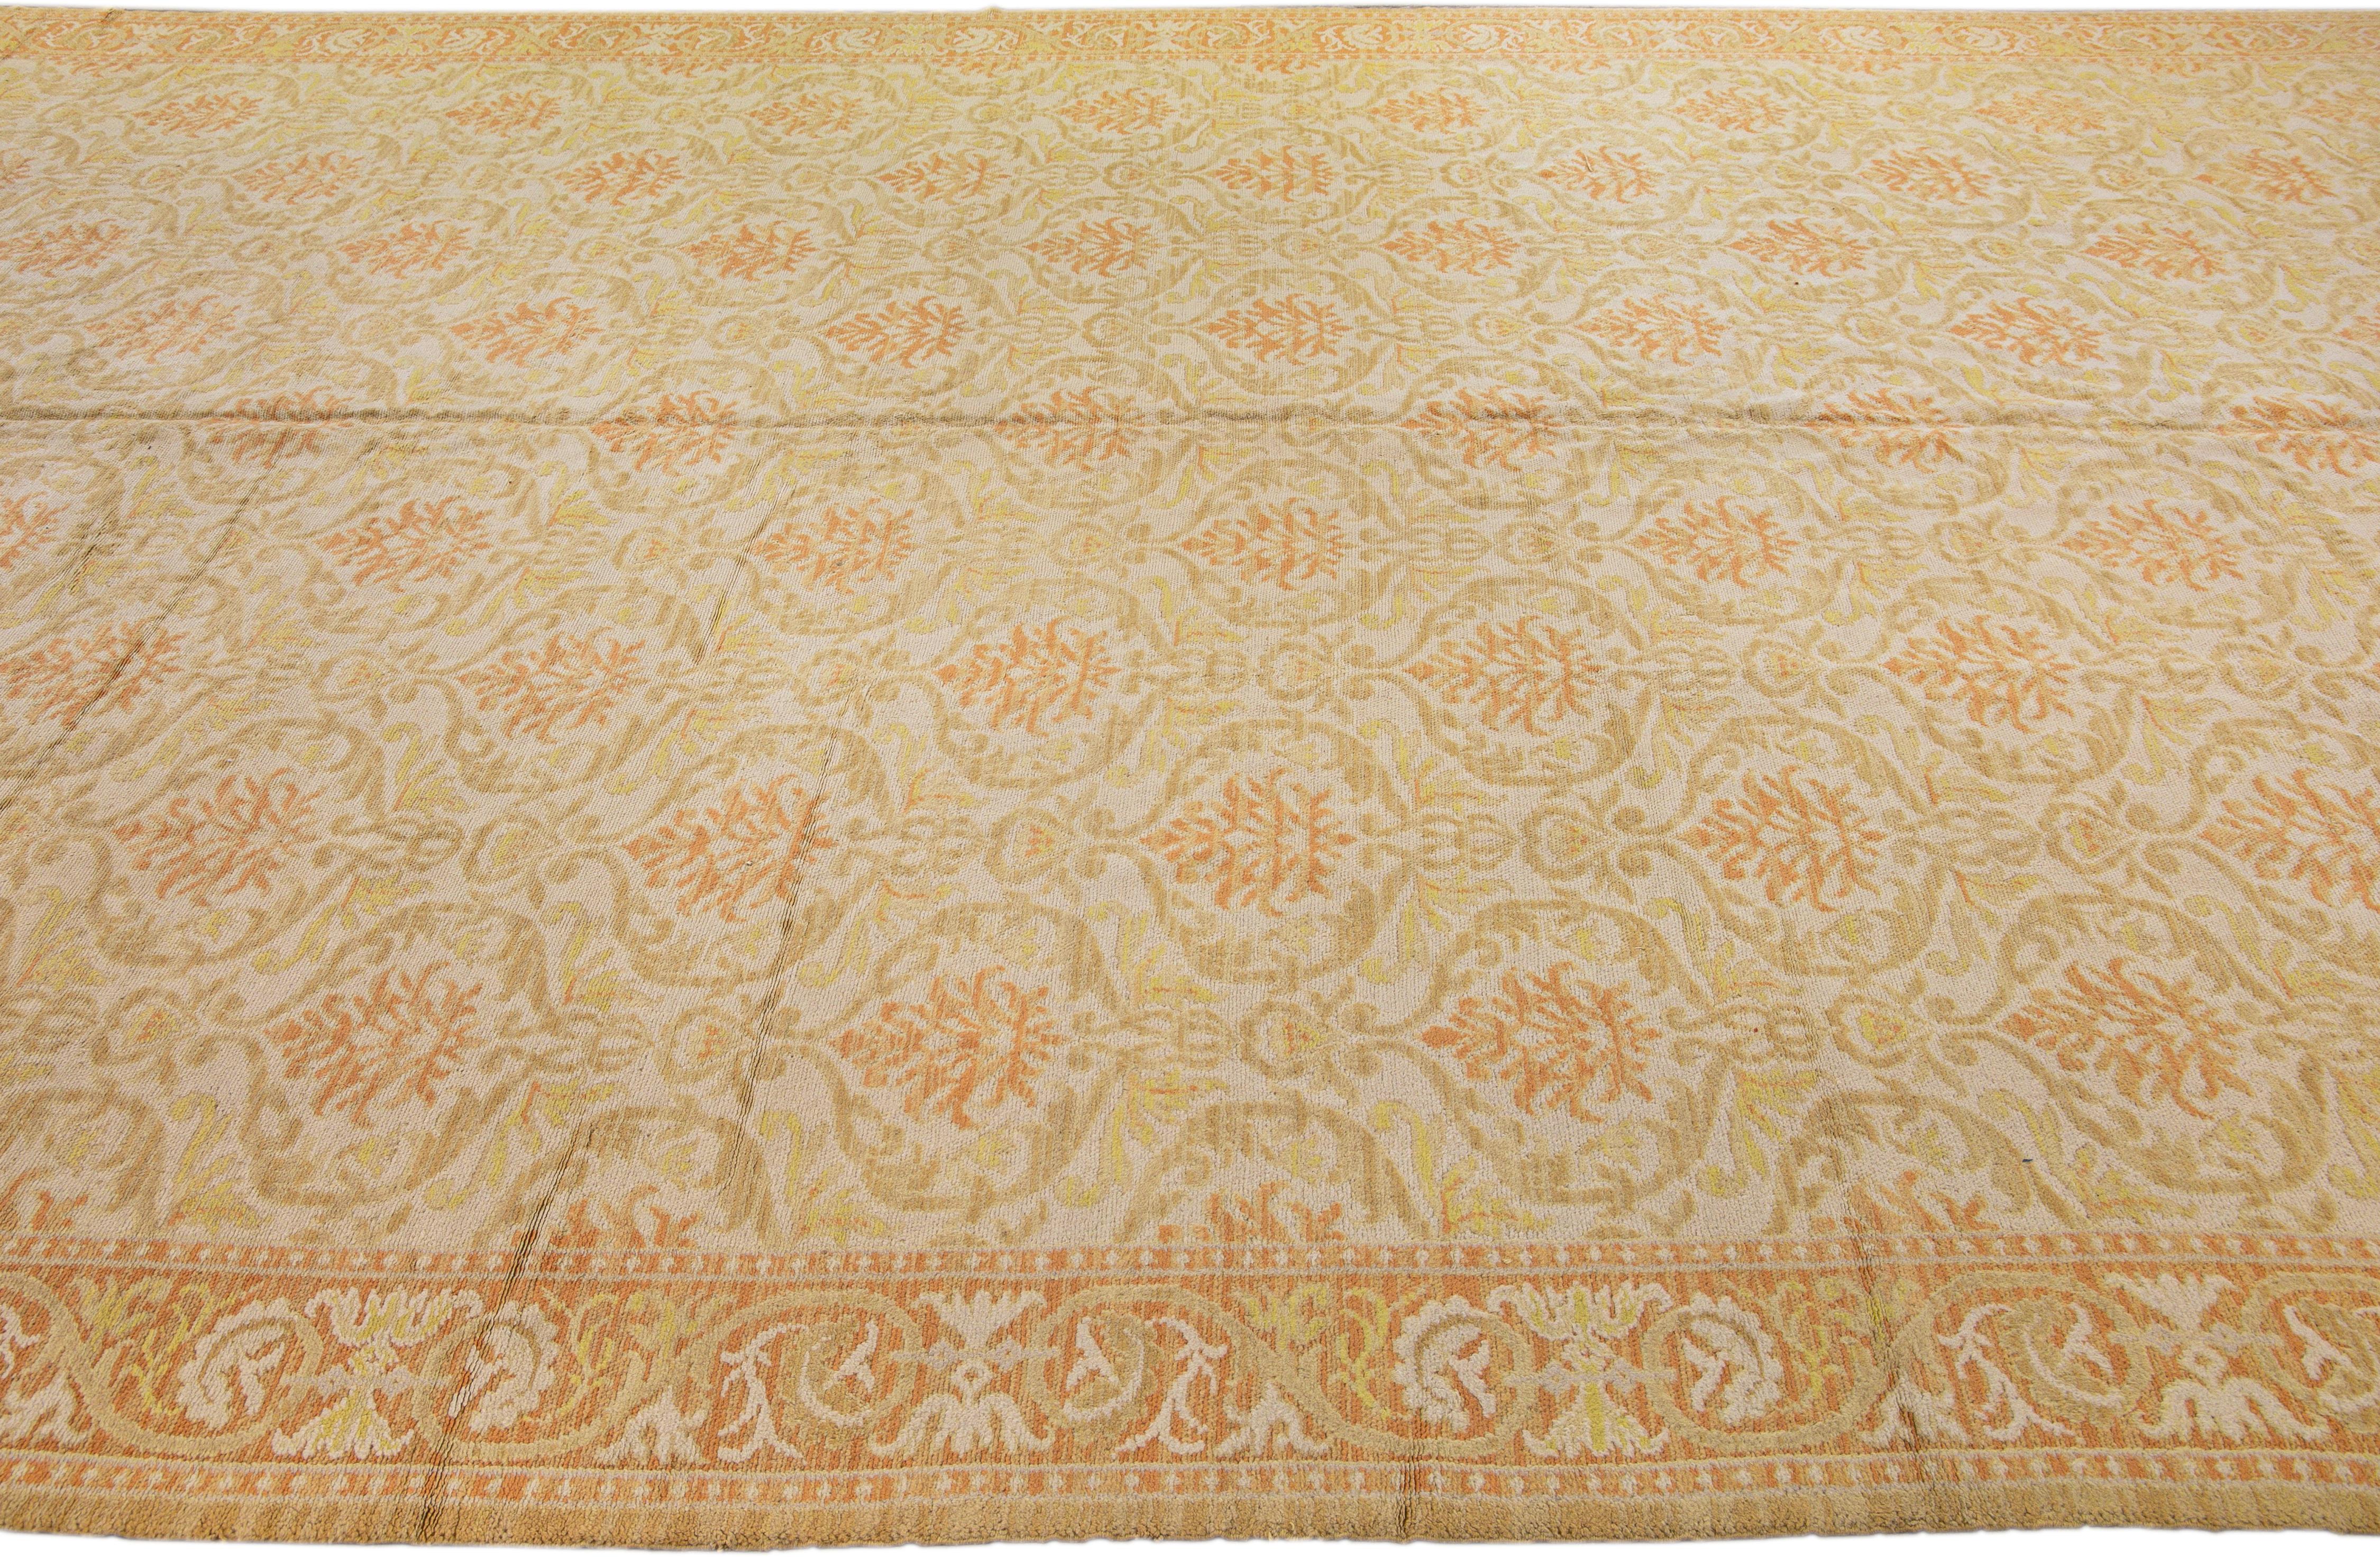 Vintage Spanish Cuenca Handmade Allover Floral Beige Oversize Wool Rug In Excellent Condition For Sale In Norwalk, CT